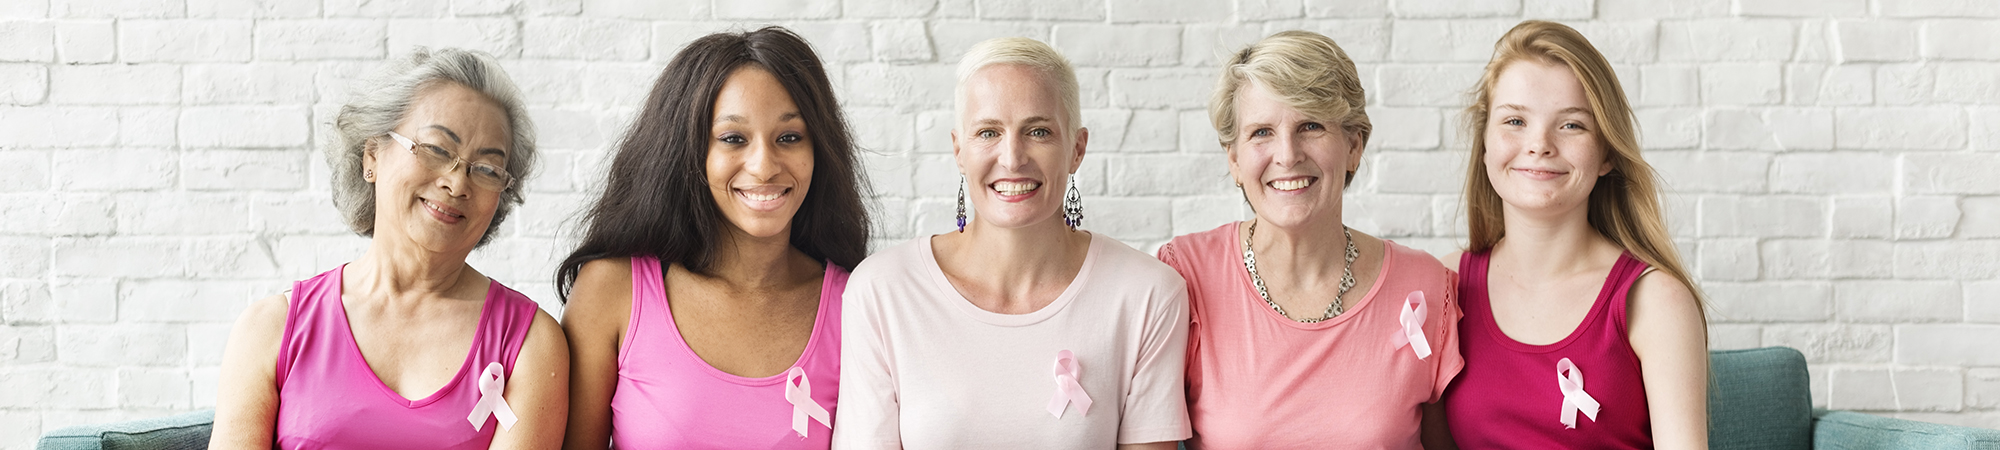 Group of 5 smiling women wearing breast cancer awareness ribbons